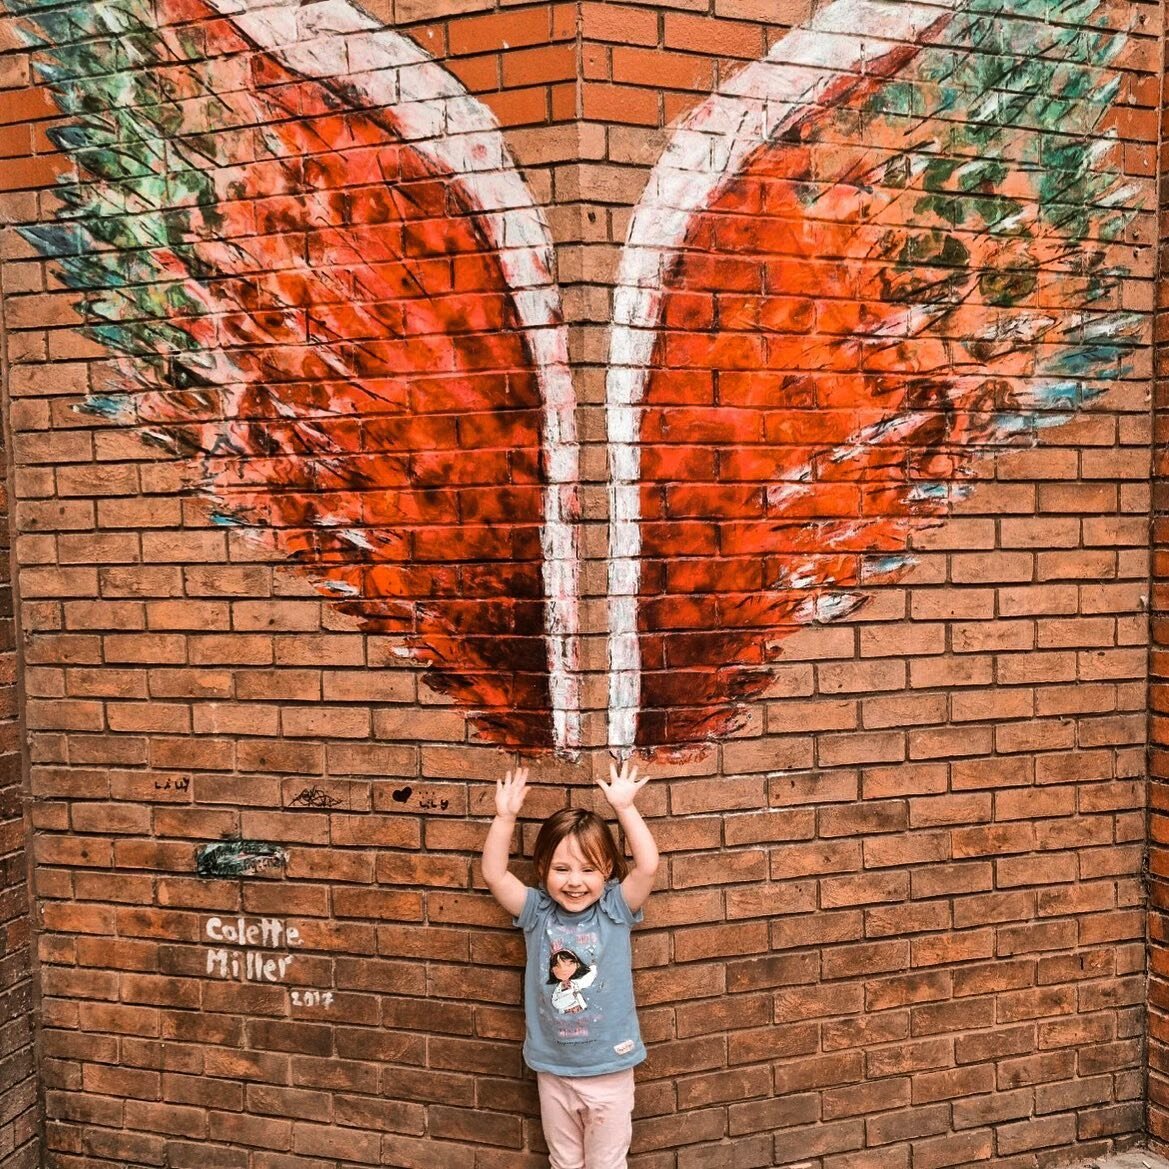 Wakefield England (the best Fish and Chips )Repost from @beksbooknestx
&bull;
Looks like an angel but she's actually a threenager ❤️⠀⠀
⠀⠀⠀ 
GlobalAngelWingsProject created 2012 to remind humanity #wearetheangels of this earth 🌍 
⠀⠀

⠀⠀⠀ 

⠀⠀

#posit